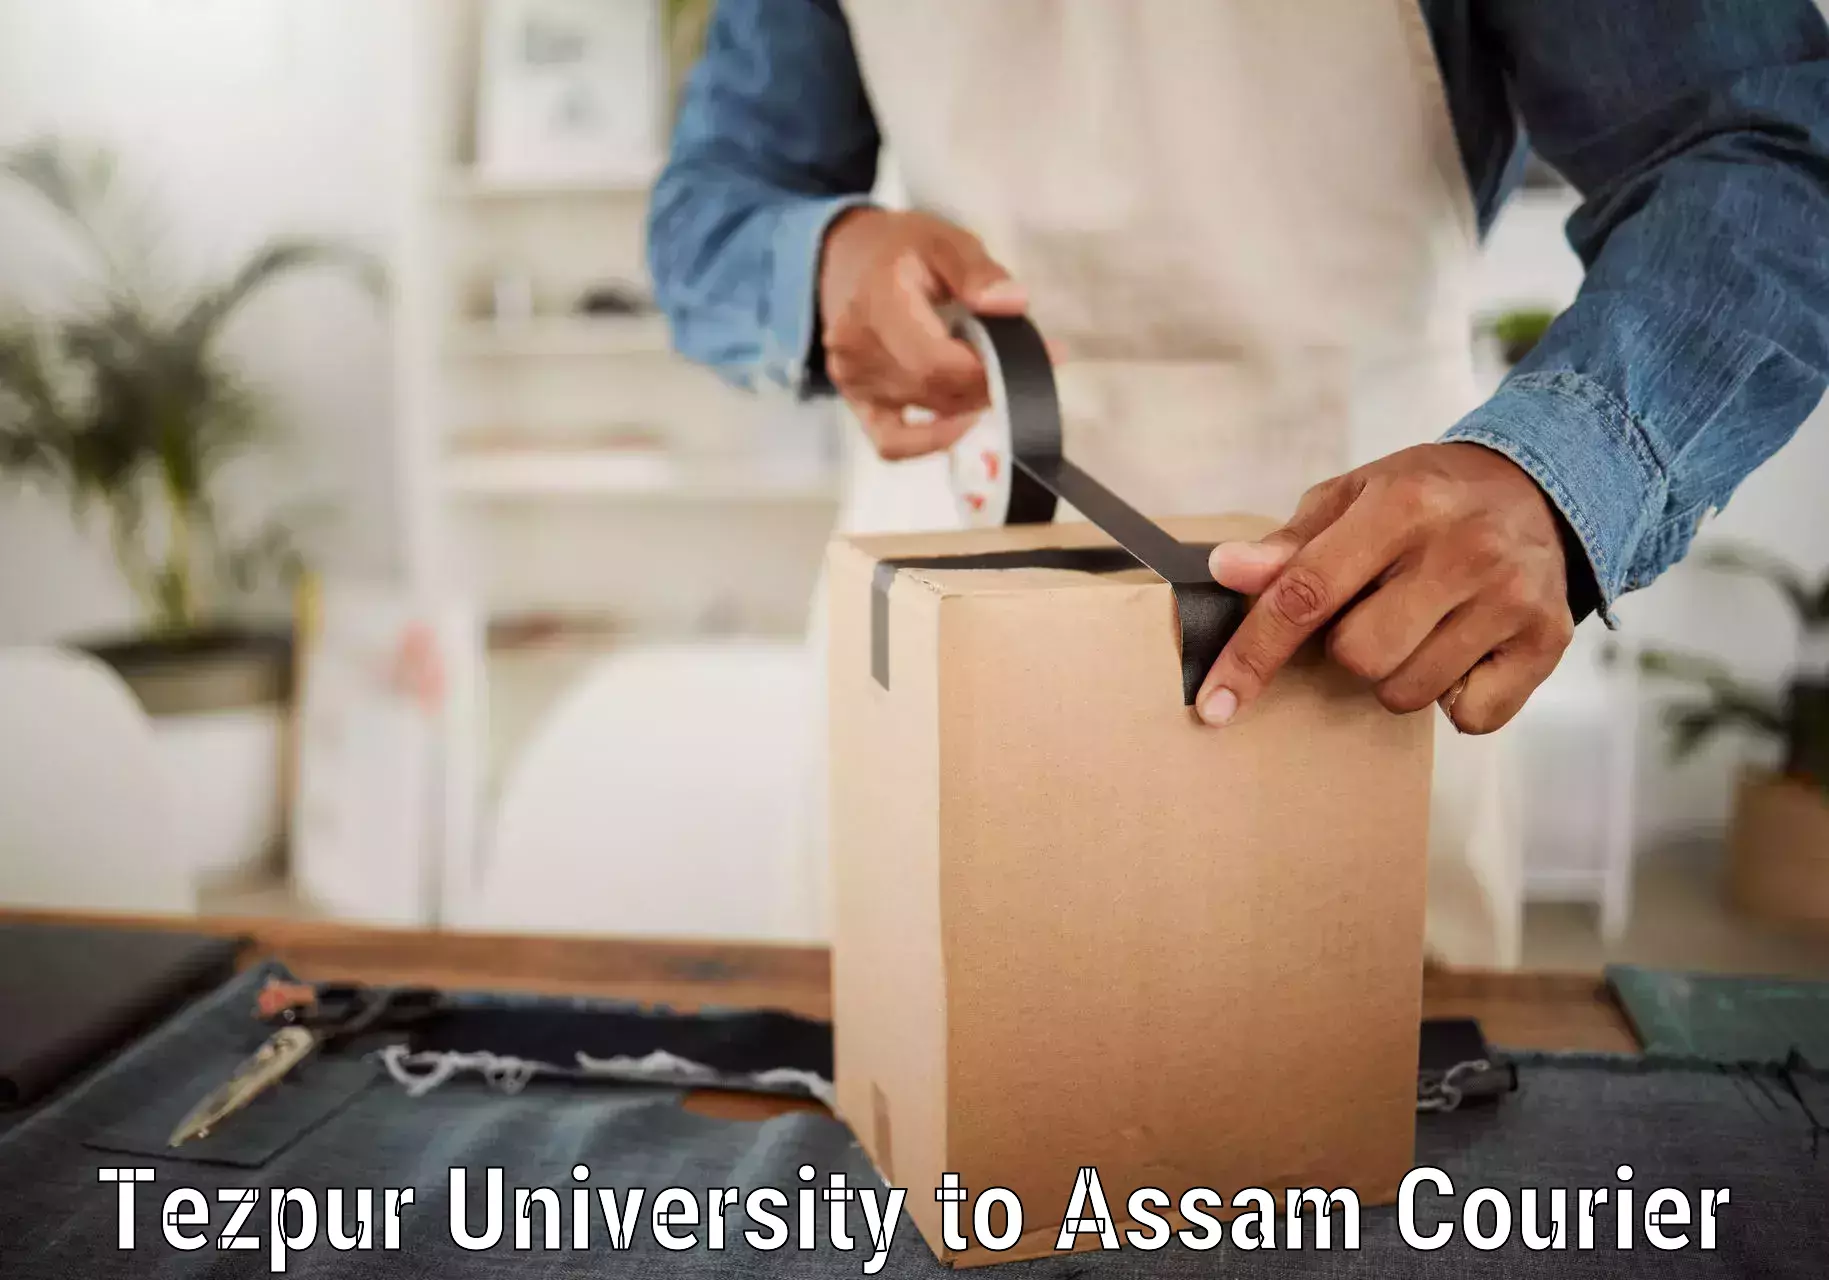 Professional delivery solutions Tezpur University to Guwahati